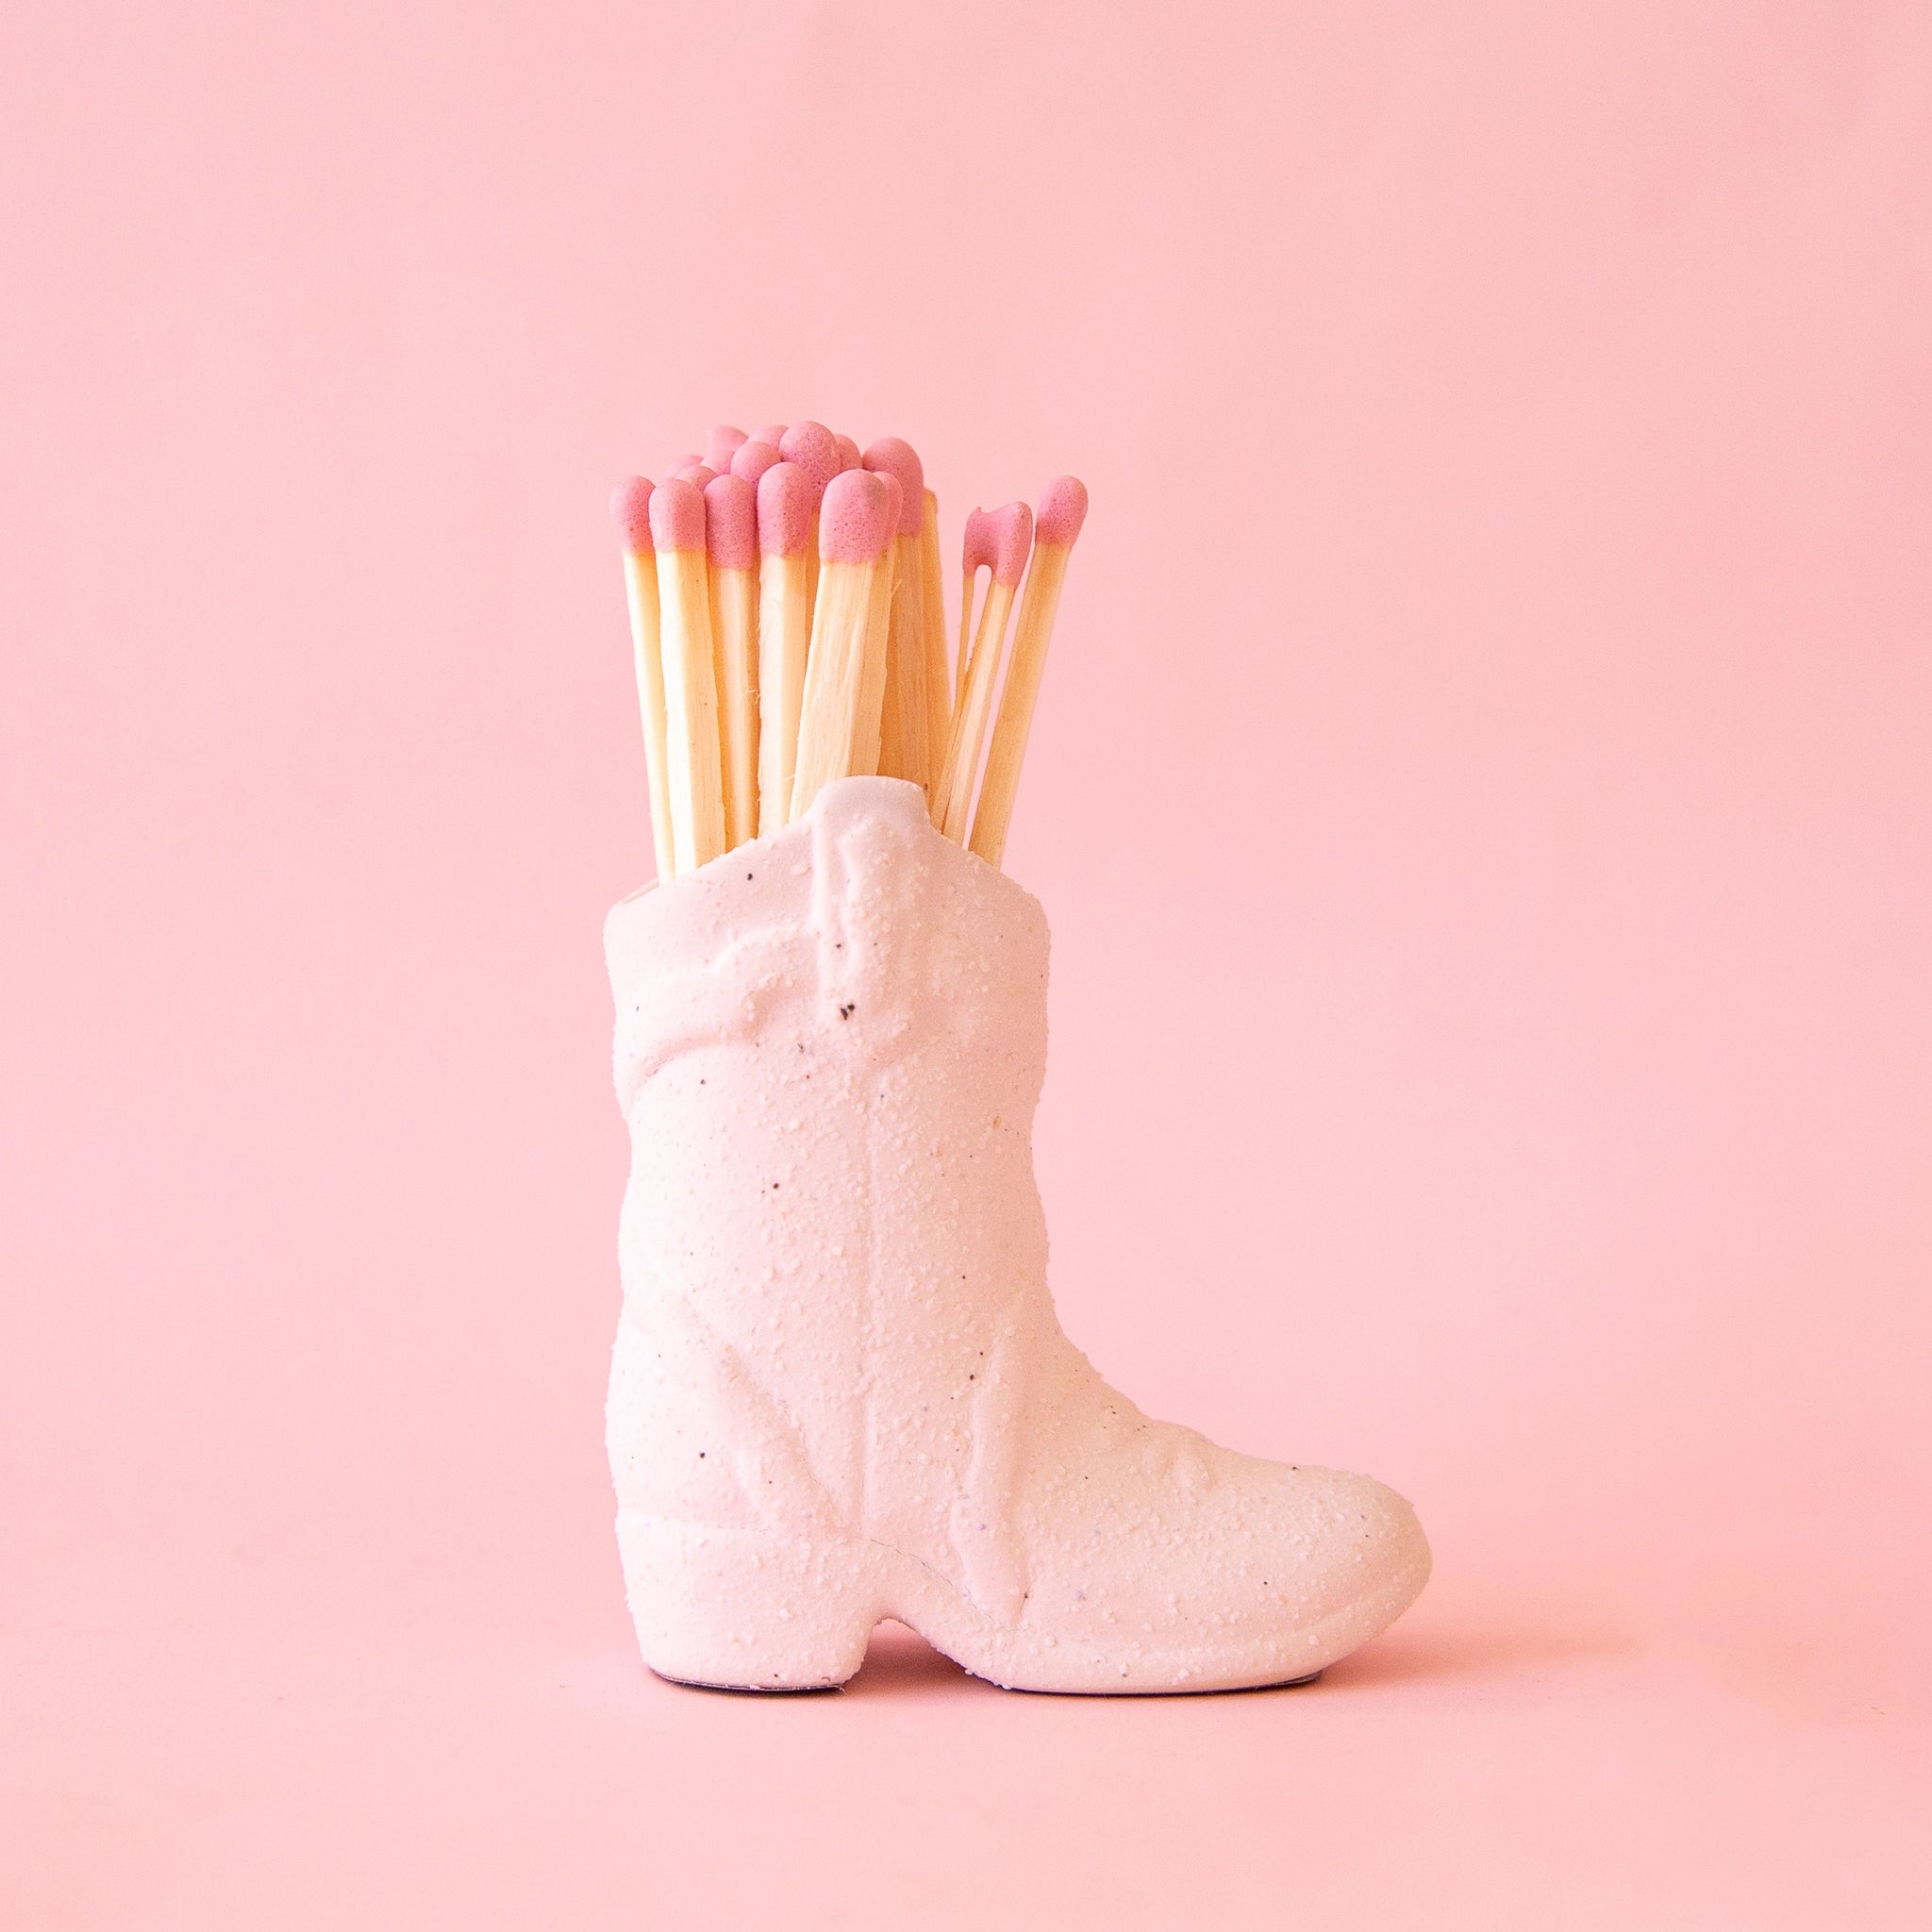 On a pink background is a white cowgirl boot shaped match holder with pink matches inside